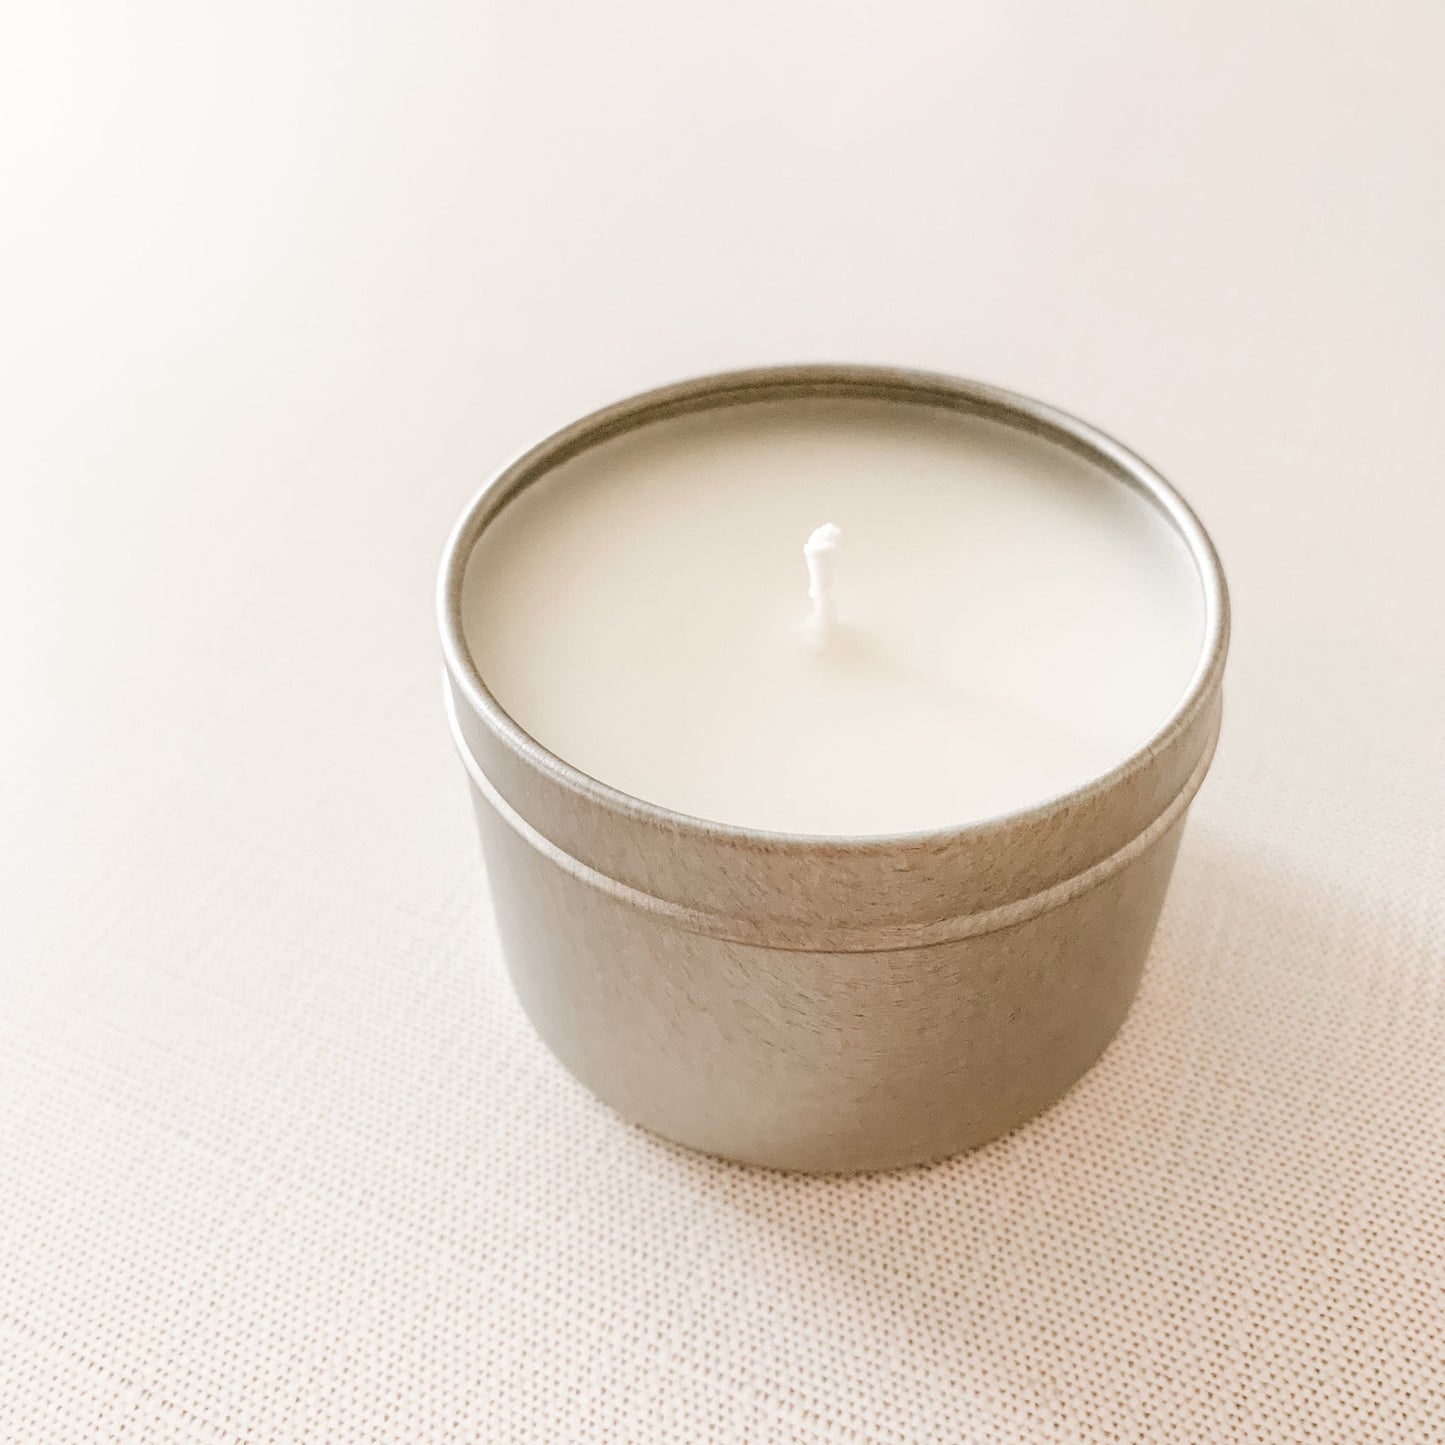 At the Beach 4oz Tin Soy Candle